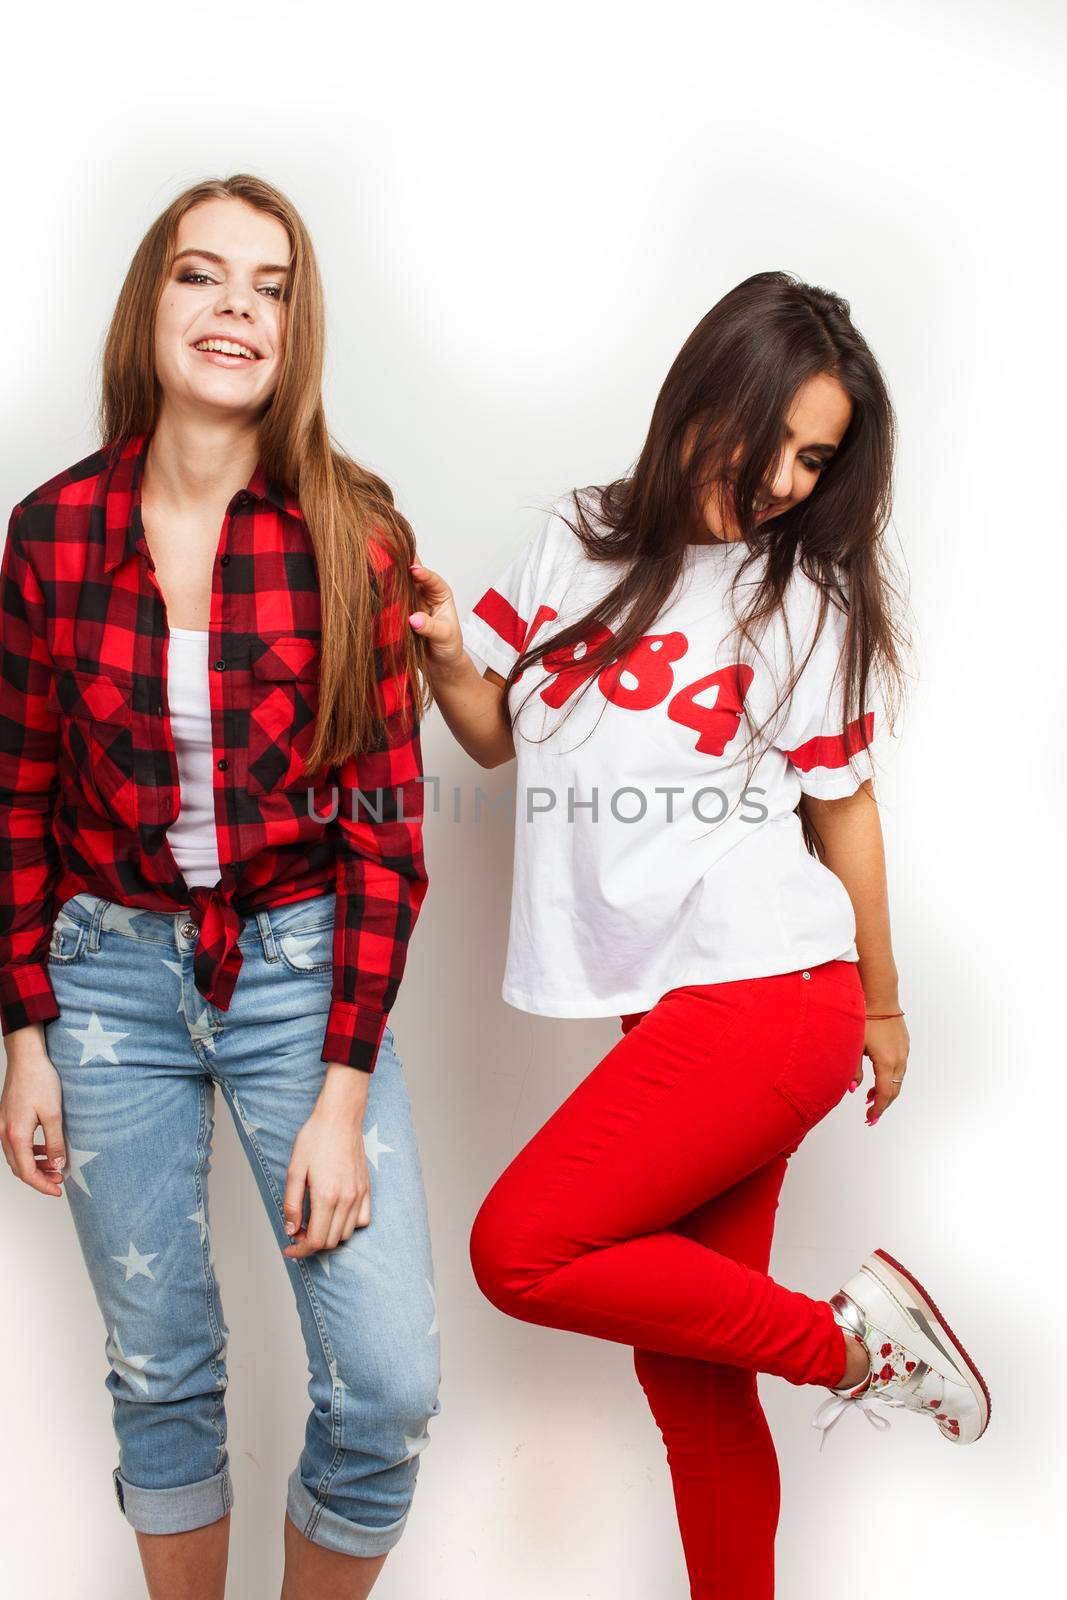 best friends teenage girls together having fun, posing emotional on white background, besties happy smiling, lifestyle people concept, blond and brunette multi nations by JordanJ